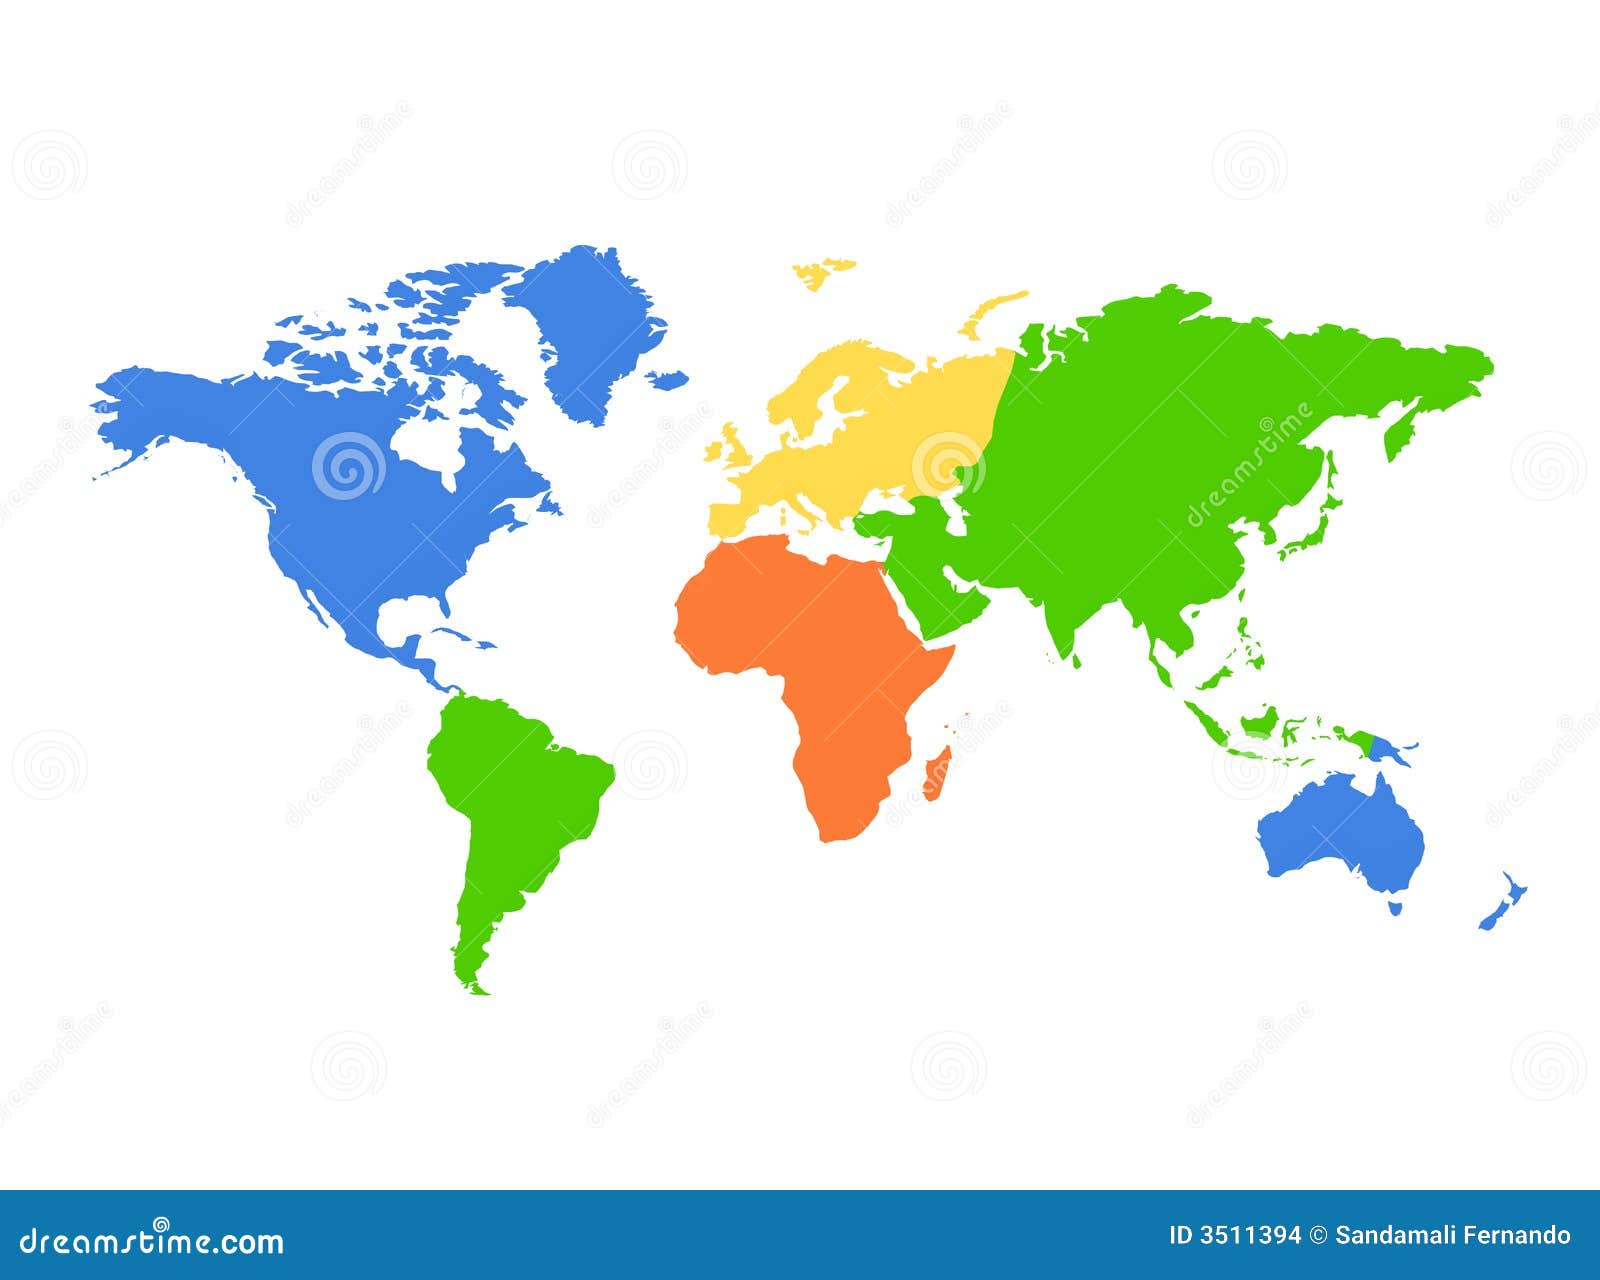 continents world map - colorful